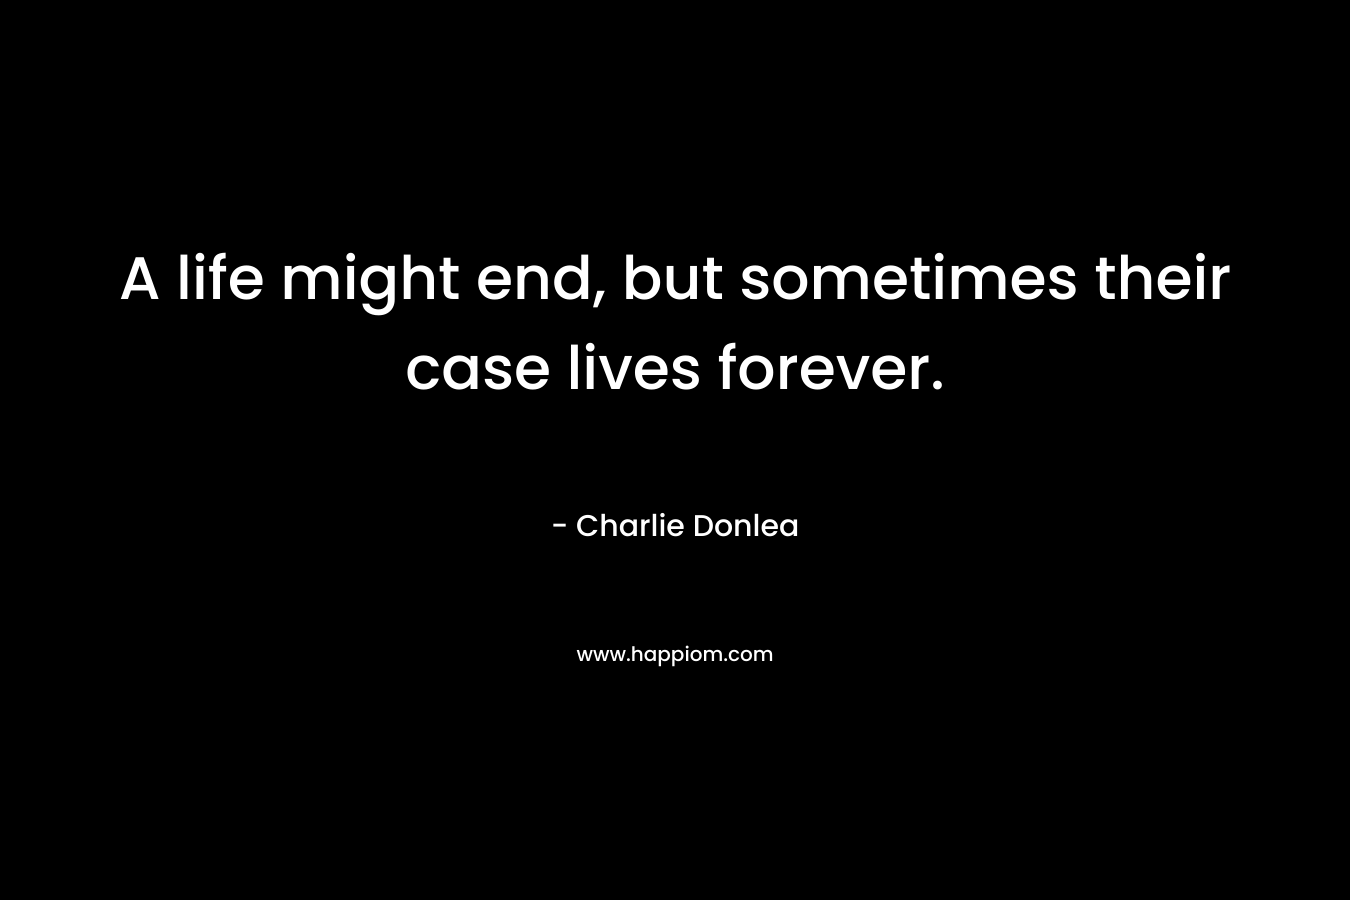 A life might end, but sometimes their case lives forever. – Charlie Donlea